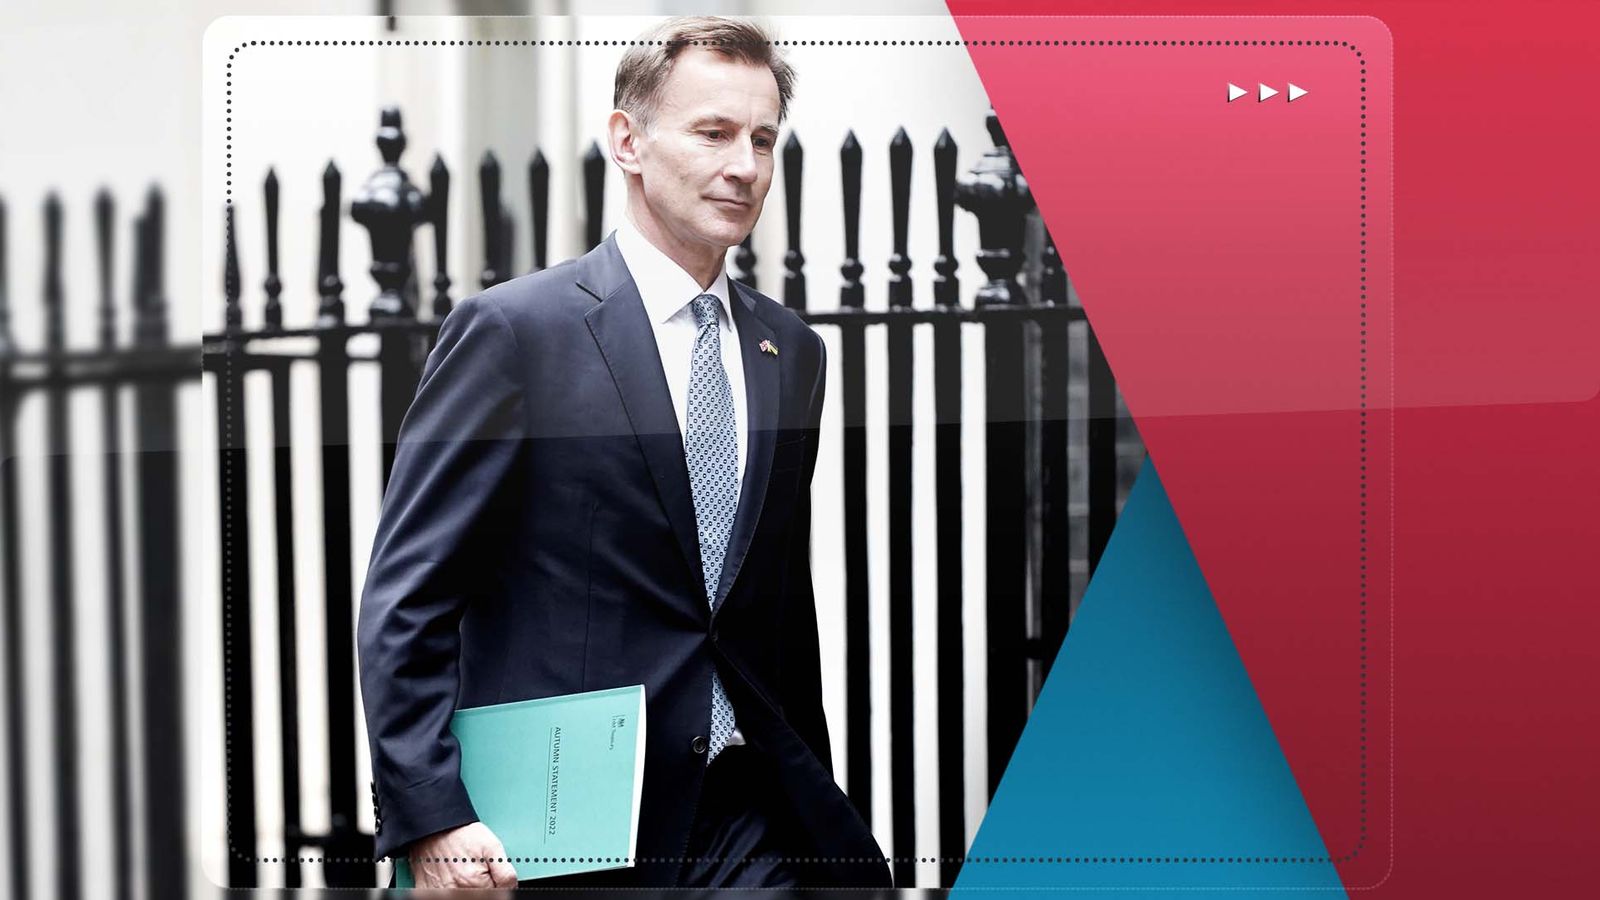 Autumn statement: Jaw-dropping change of tack as Jeremy Hunt announces more spending - and sets trap for next election